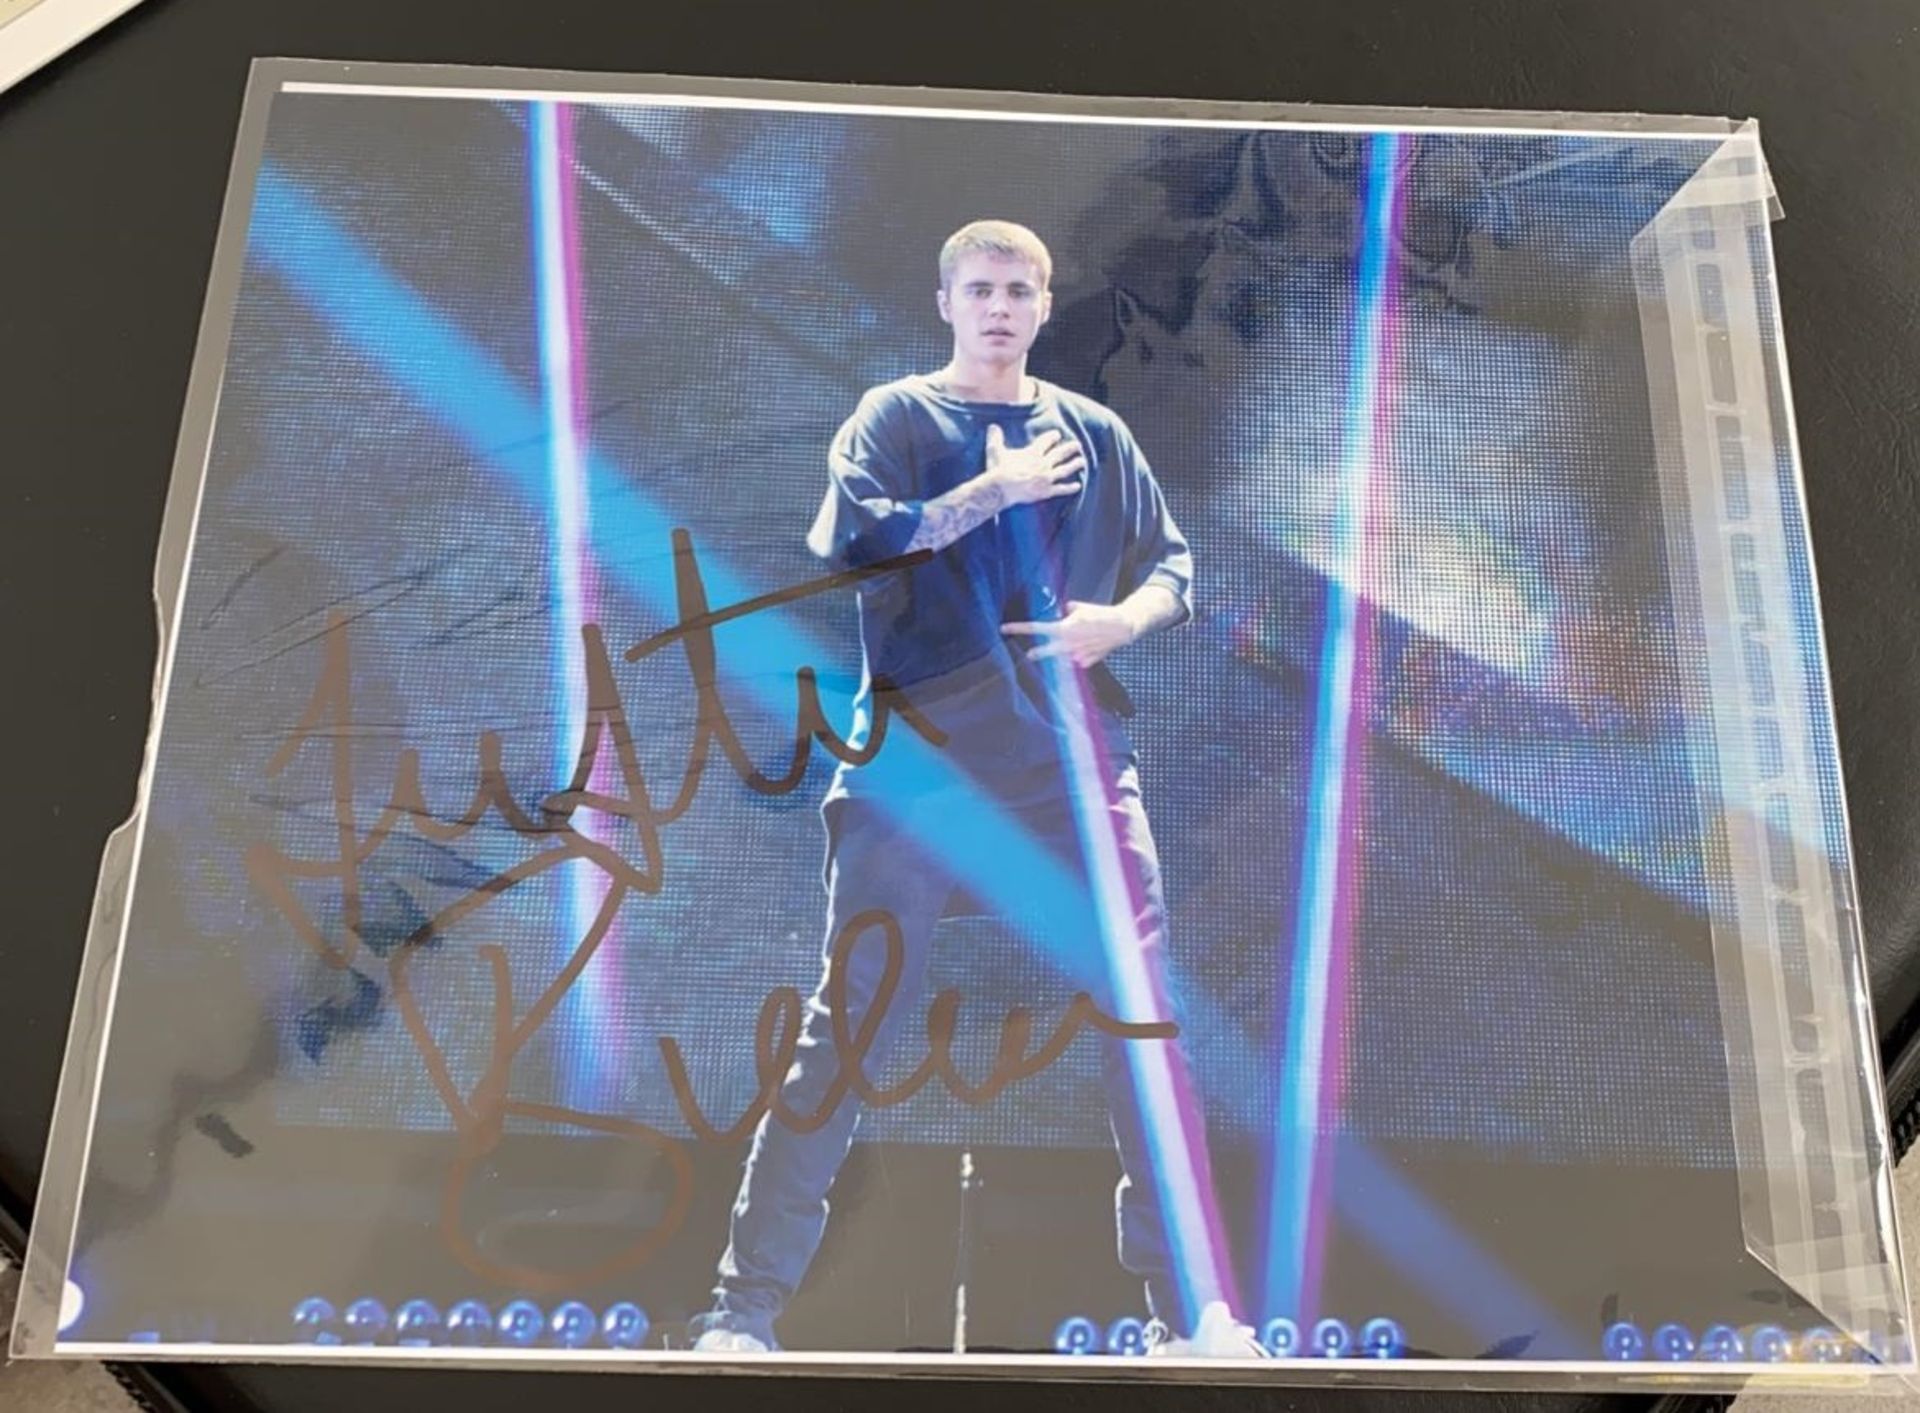 1 x Signed Autograph Picture - JUSTIN BIEBER - With COA - Size 12 x 8 Inch - NO VAT ON THE HAMMER - Image 3 of 3